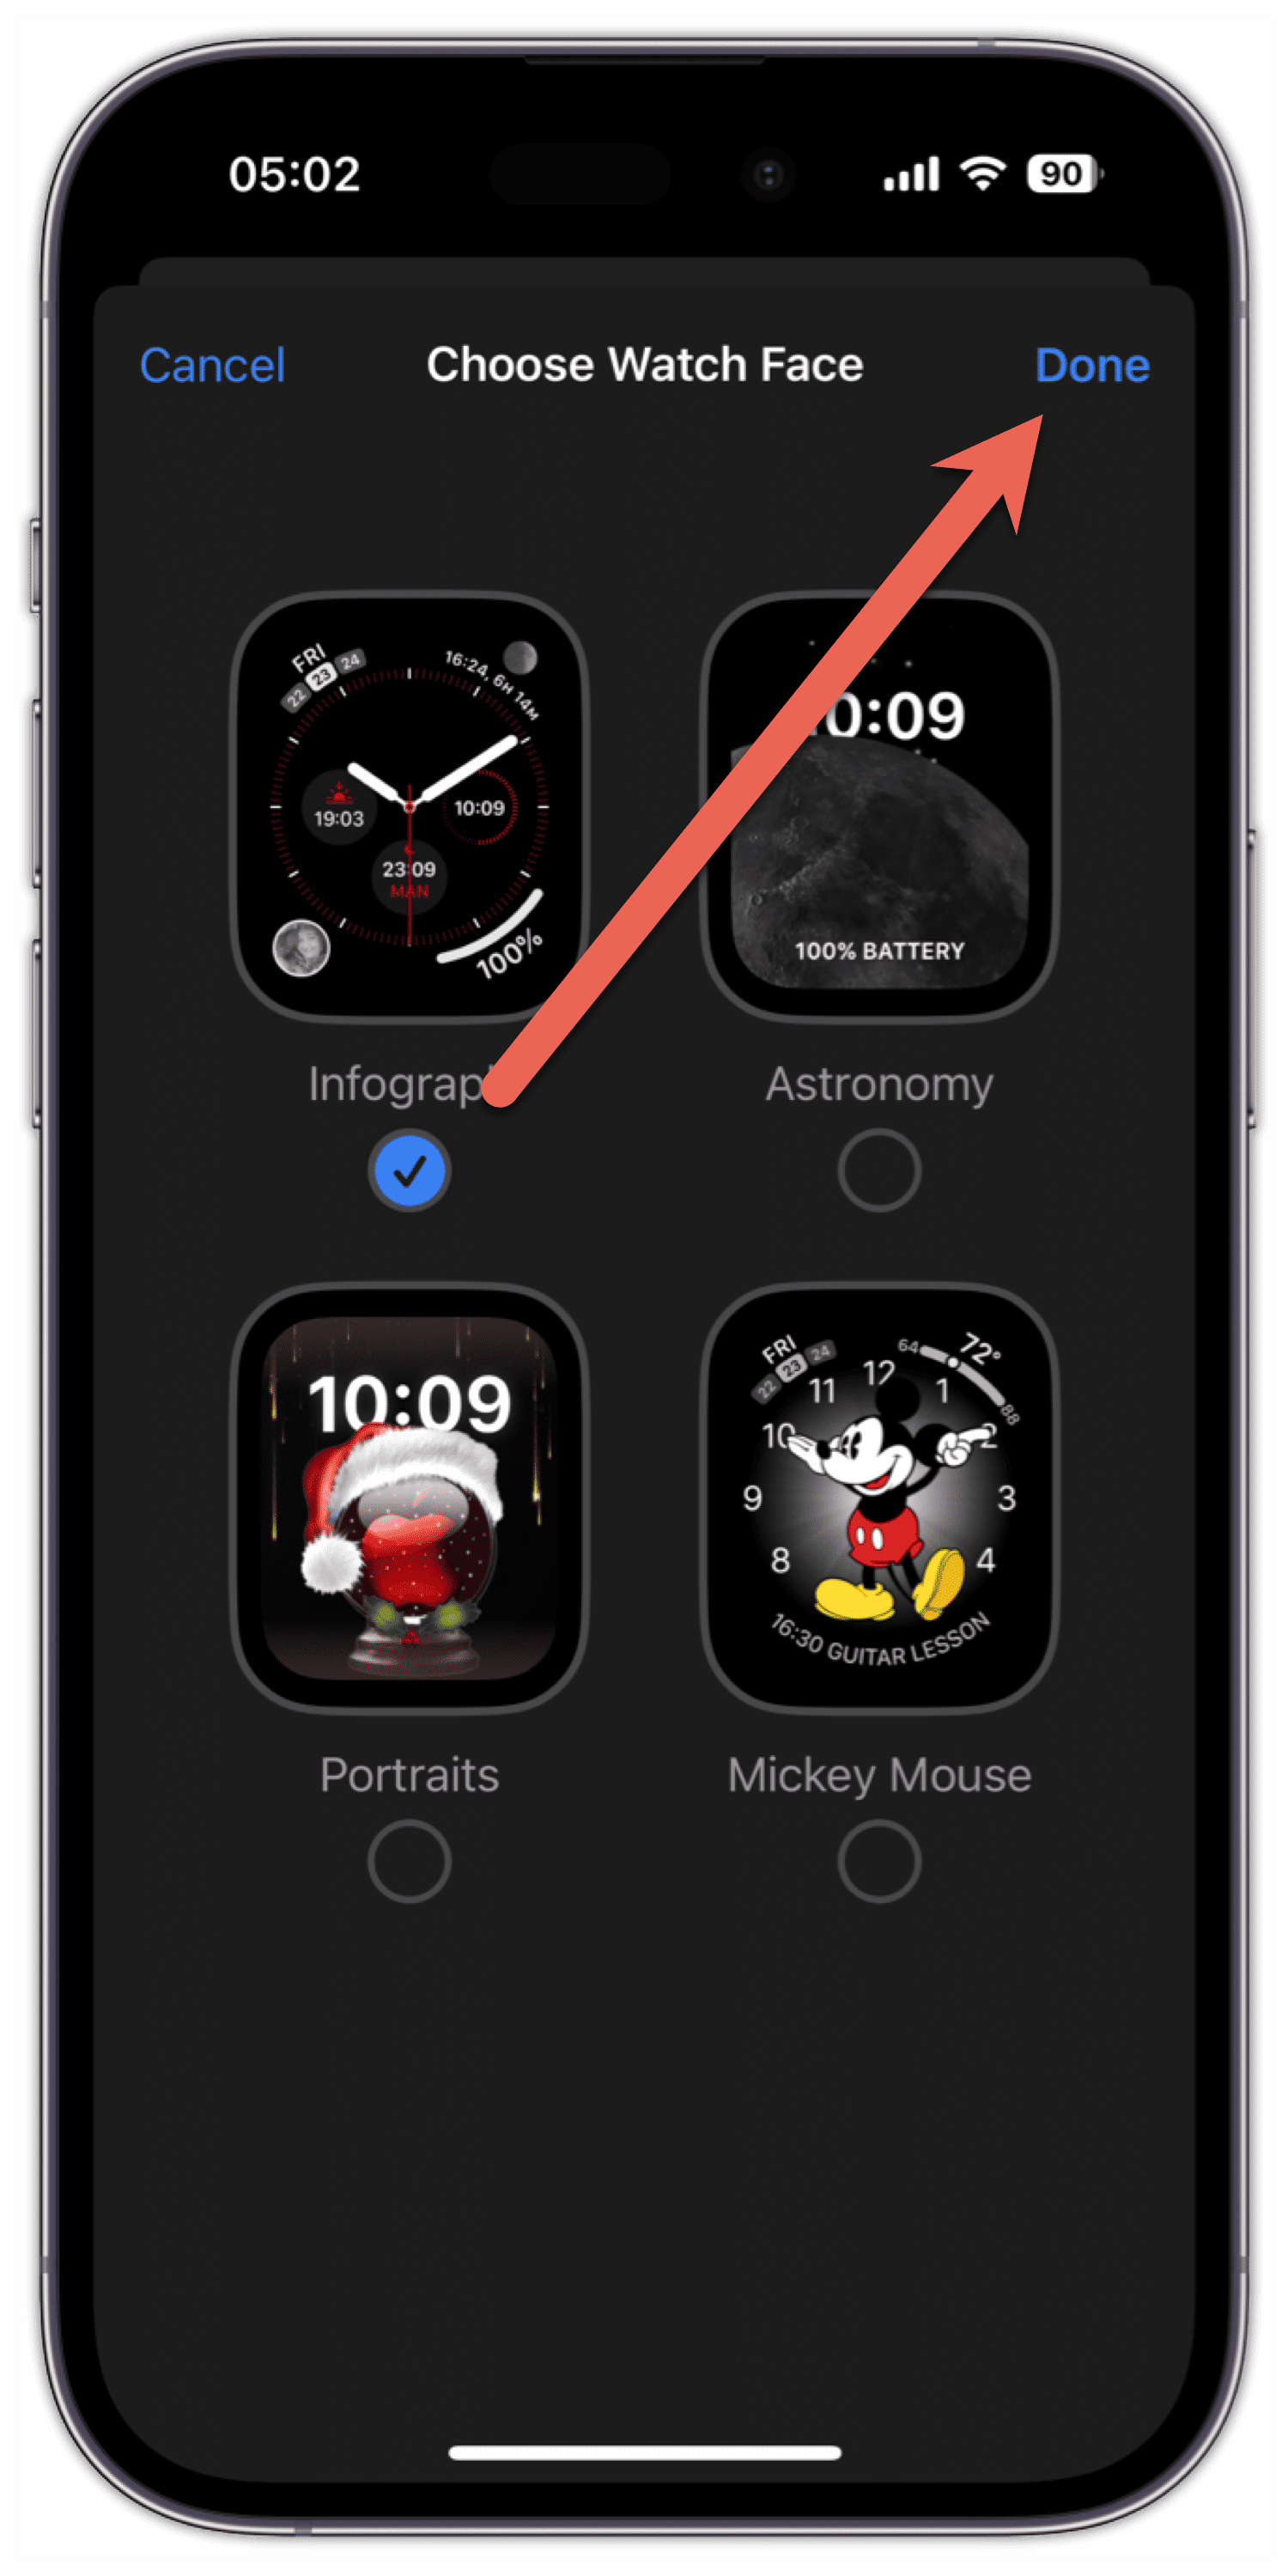 Choose Watch Face for Focus Mode